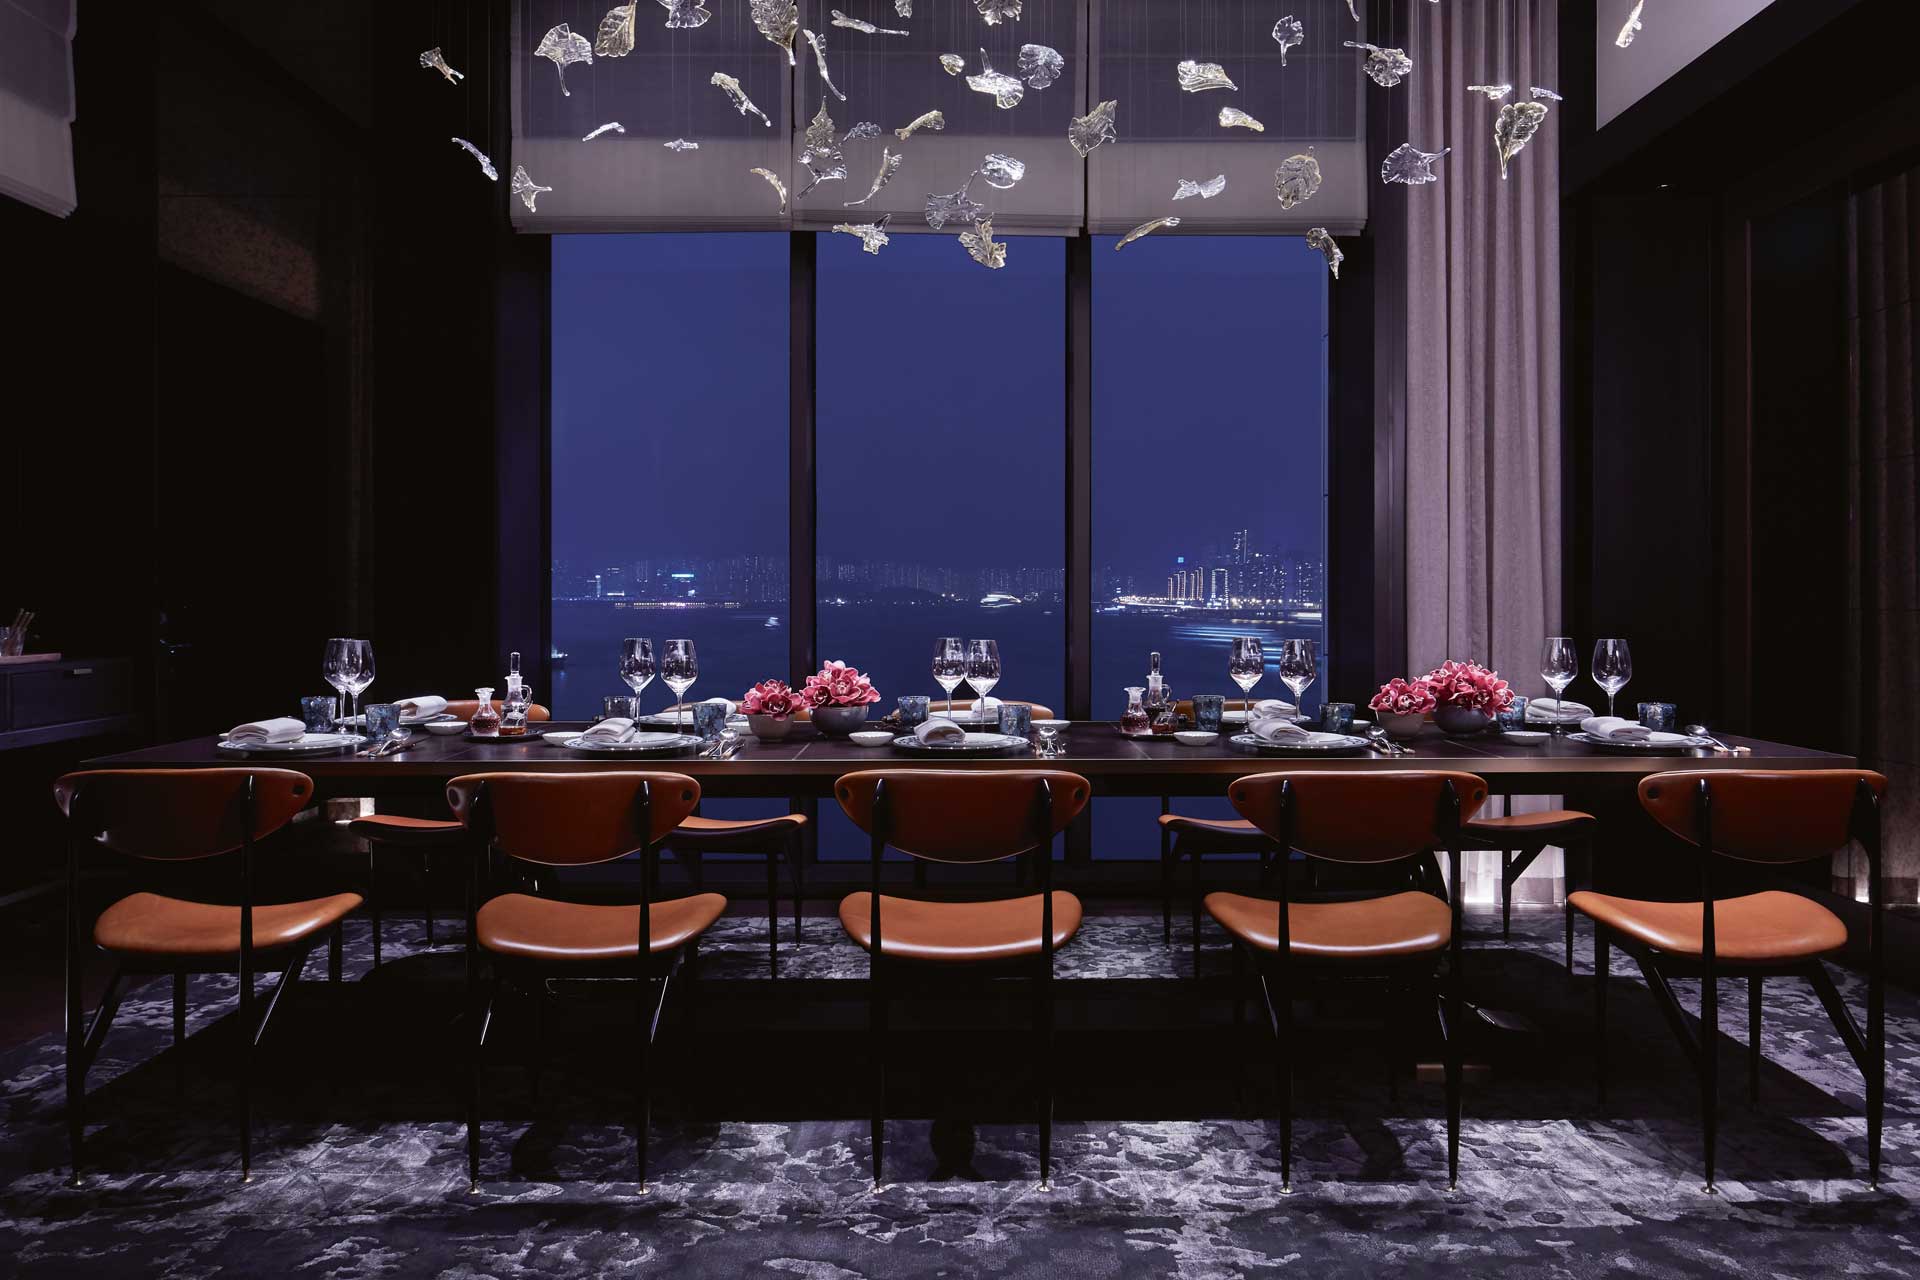 Private dining room at Rosewood Hotel Group's property in Hong Kong